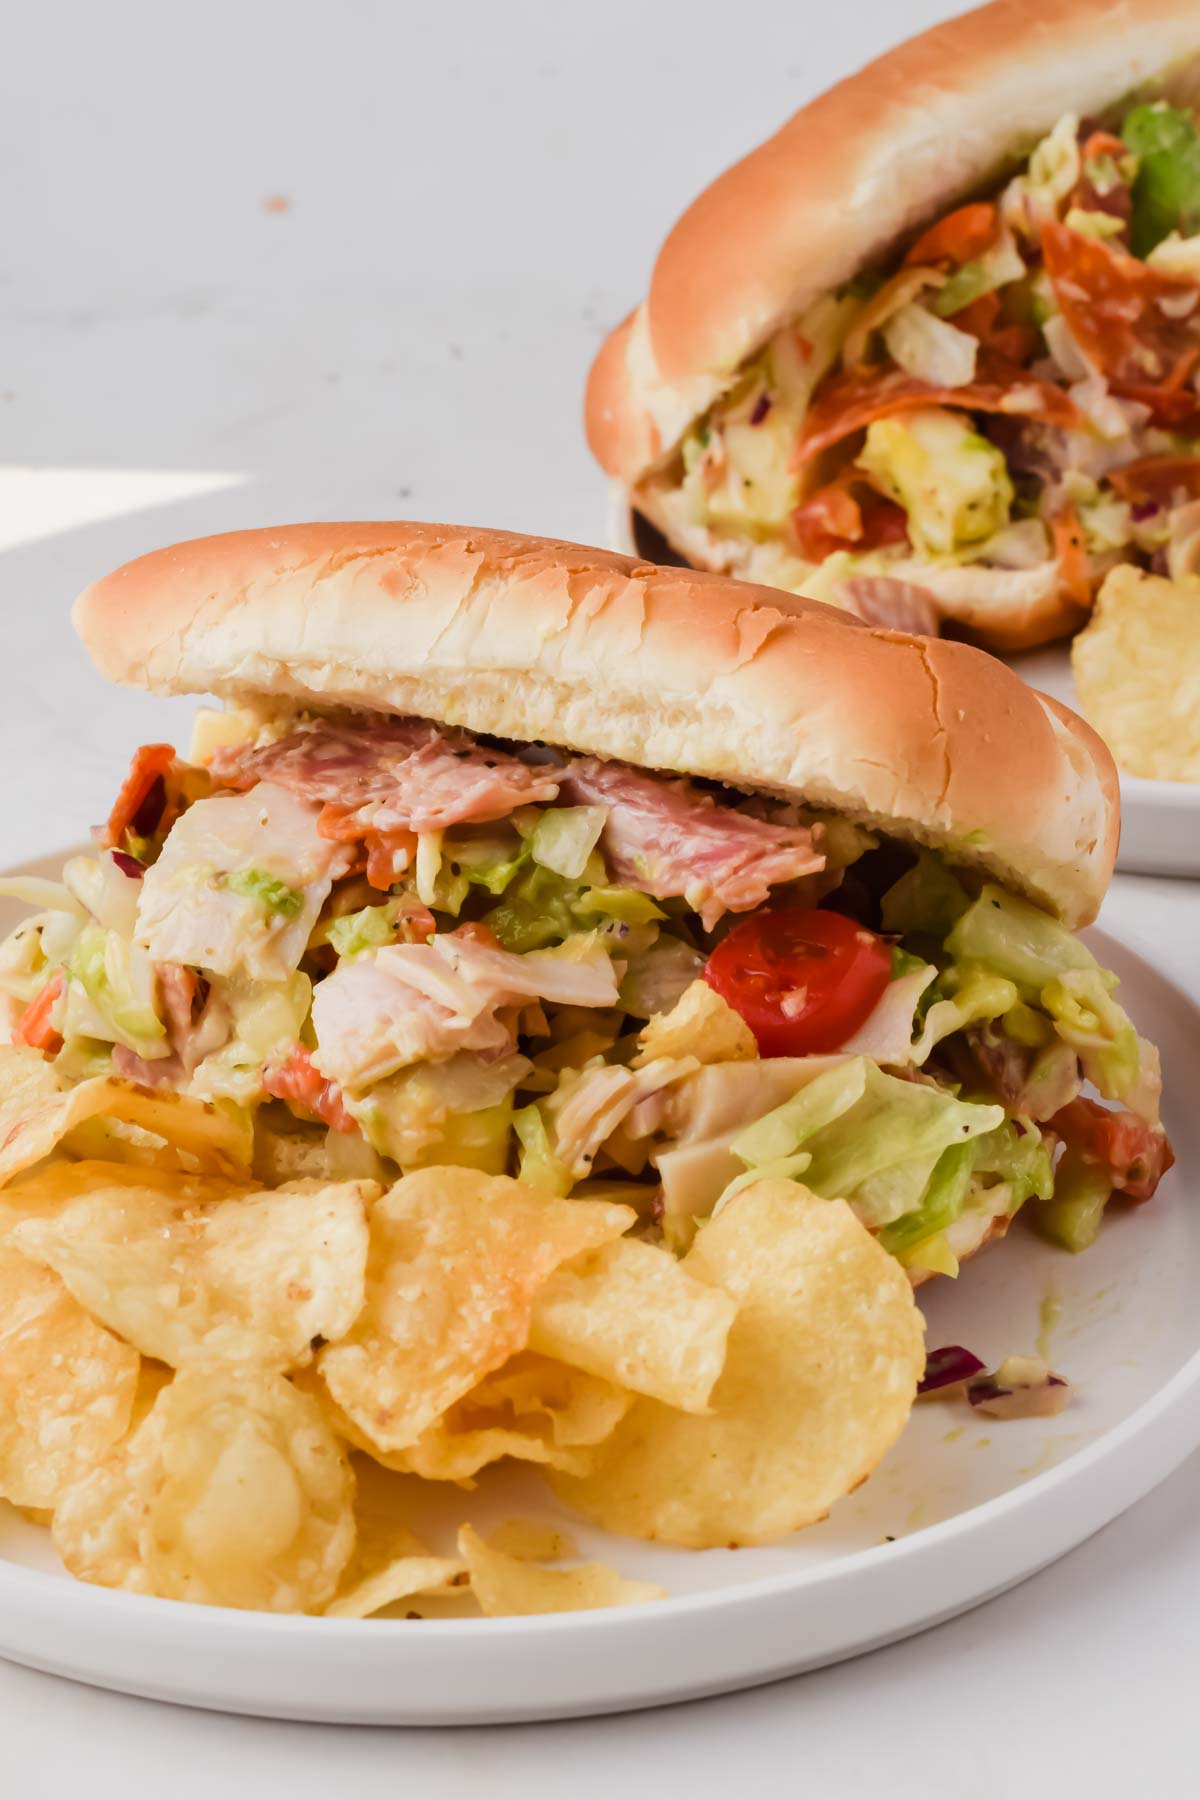 two loaded grinder sandwiches on white plates beside potato chips.